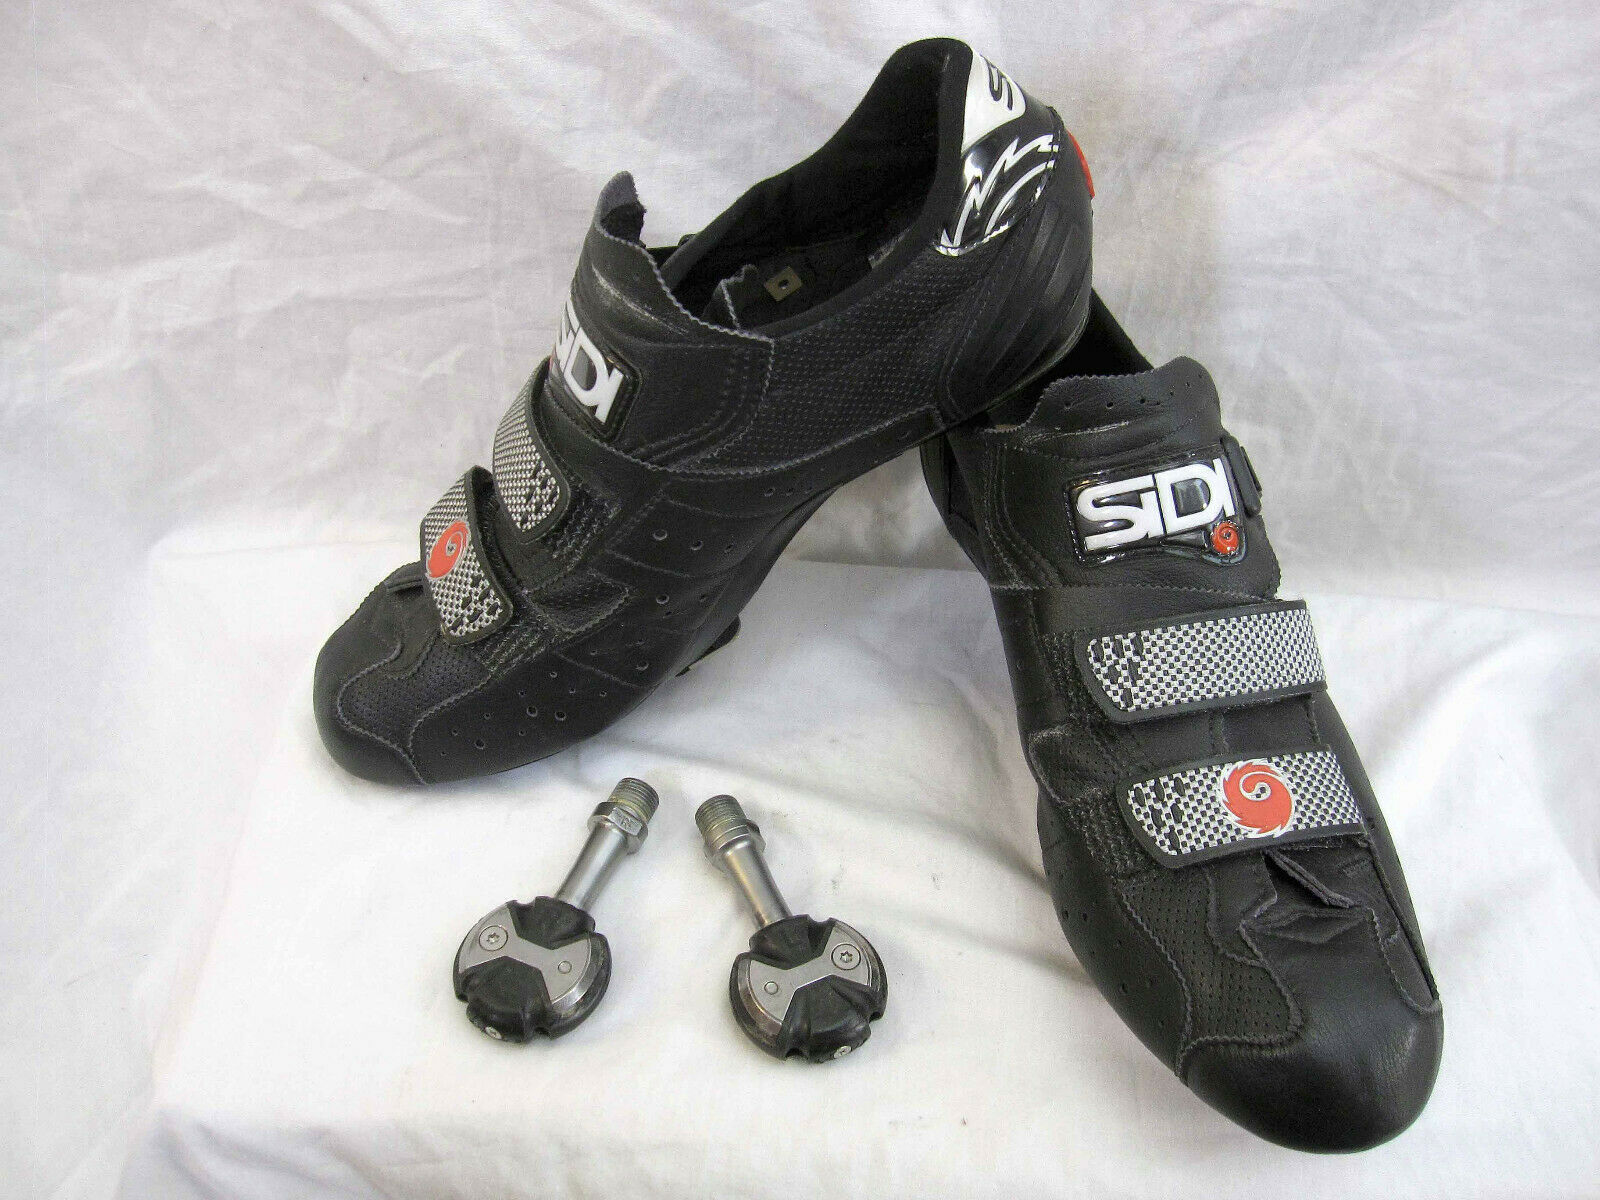 Sidi Genius road bike shoes, w/ Speedplay pedals and cleats, VERY GOOD condition